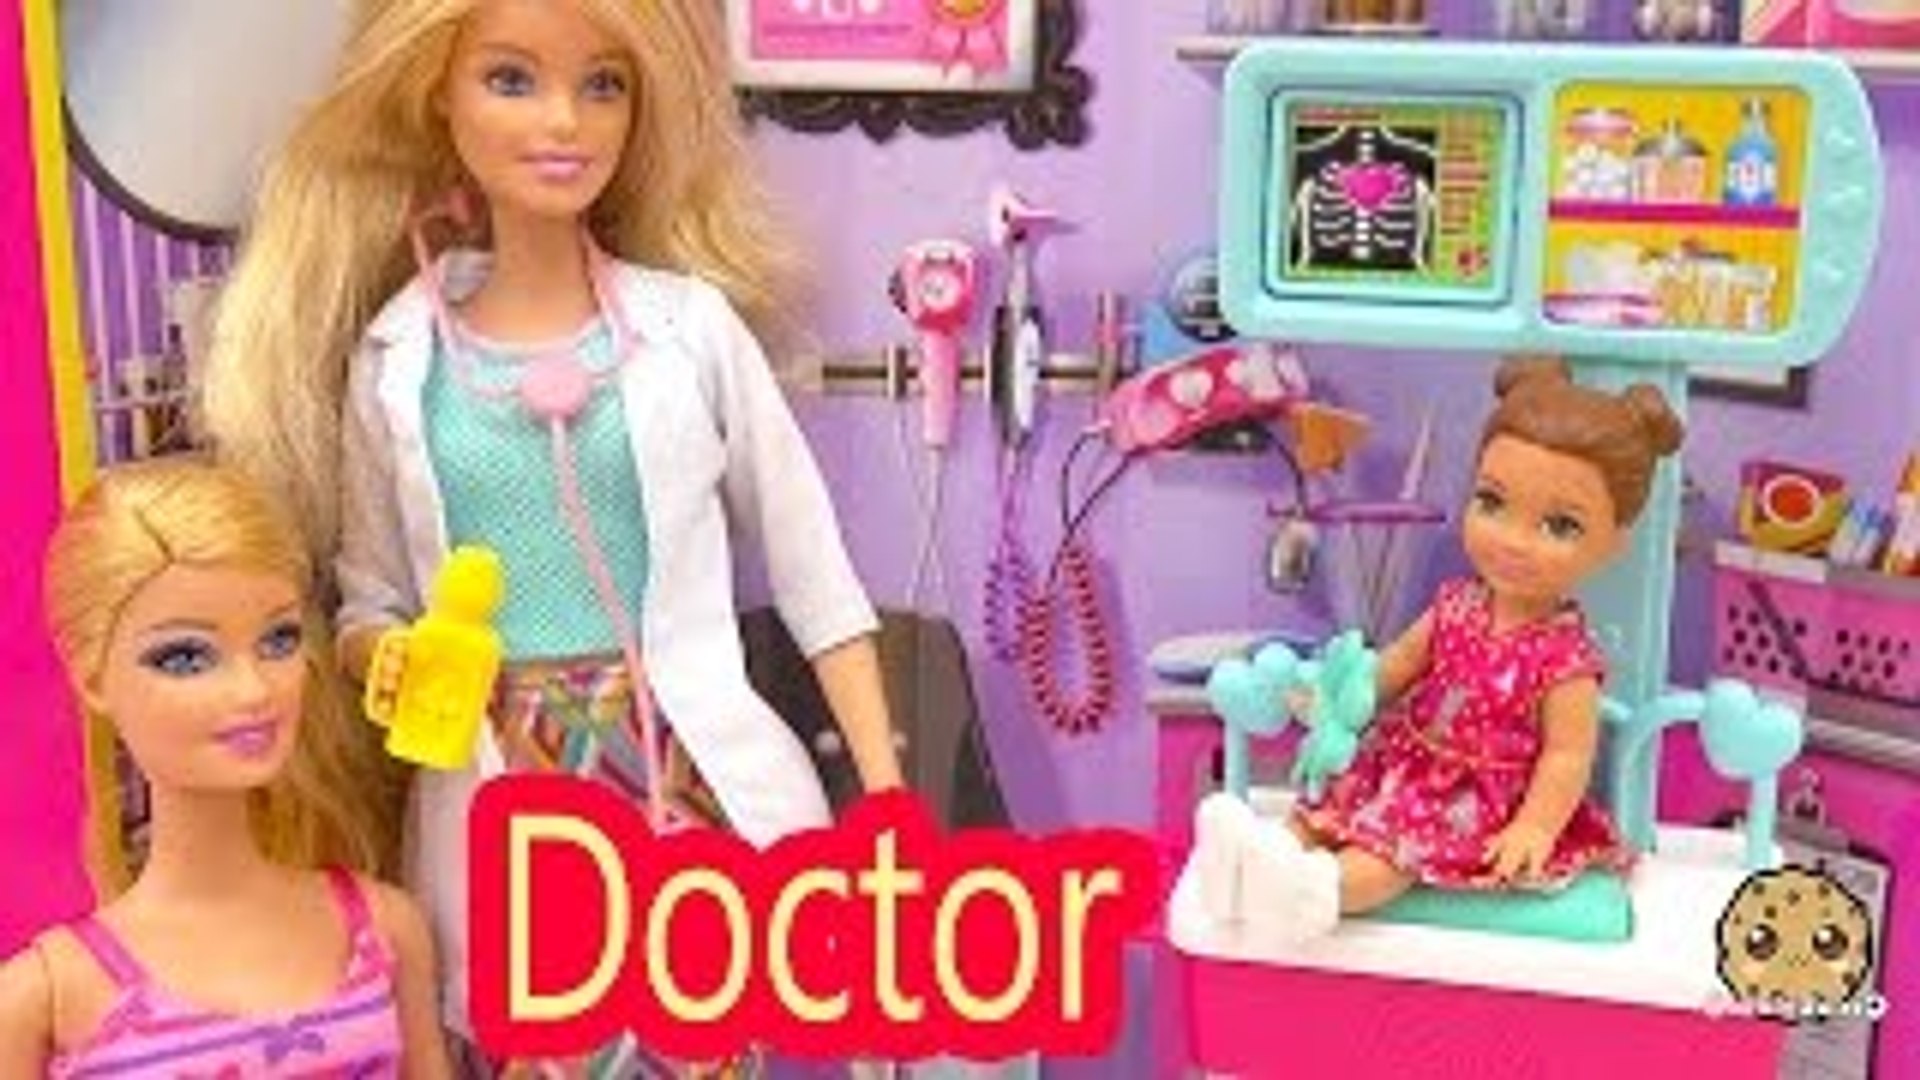 Dr. Barbie Doll Doctors Office Visit with Sick Girl - Careers Playset Toy  Video Cookieswir - Dailymotion Video